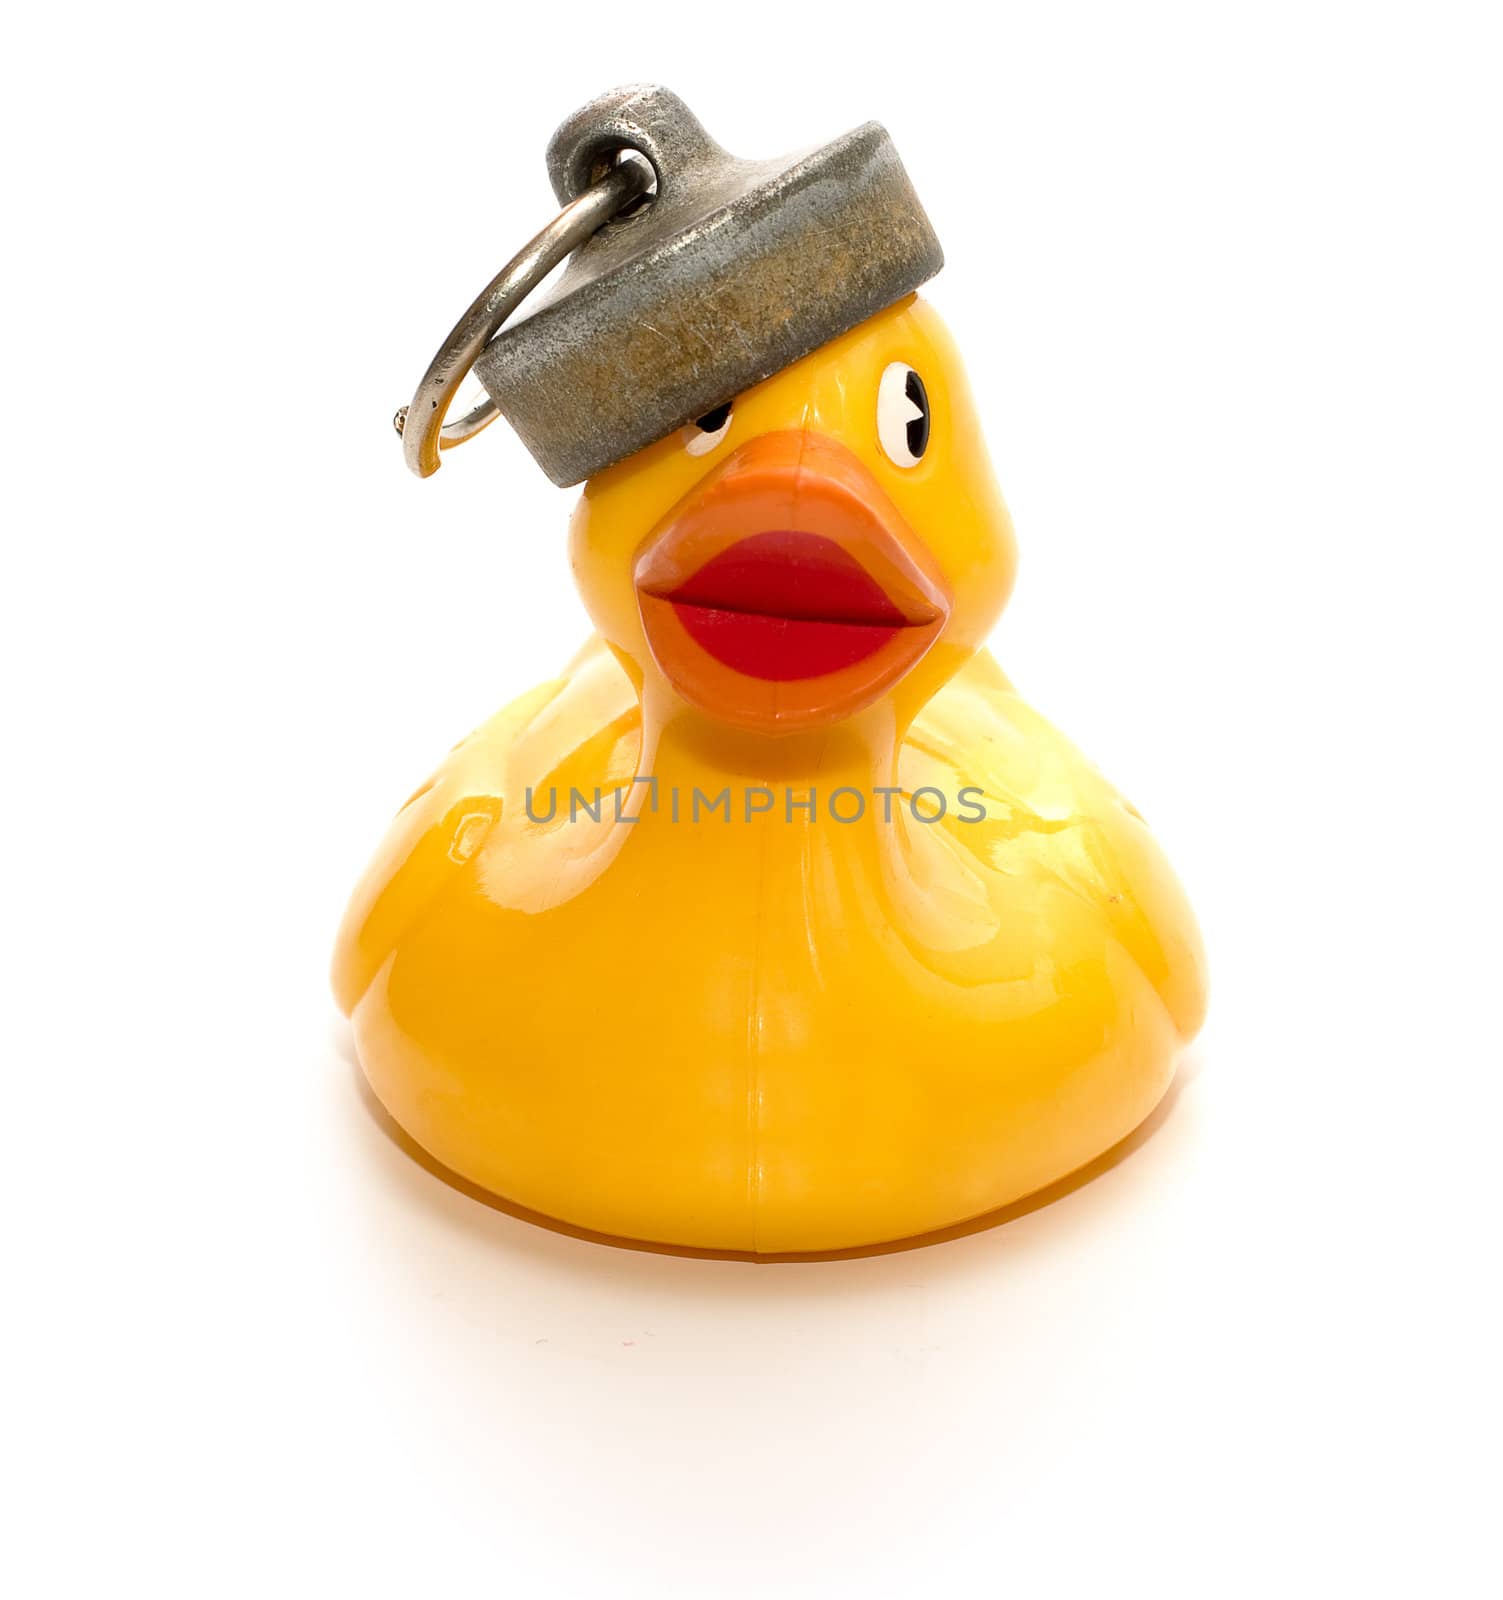 Plastic duck by snaka